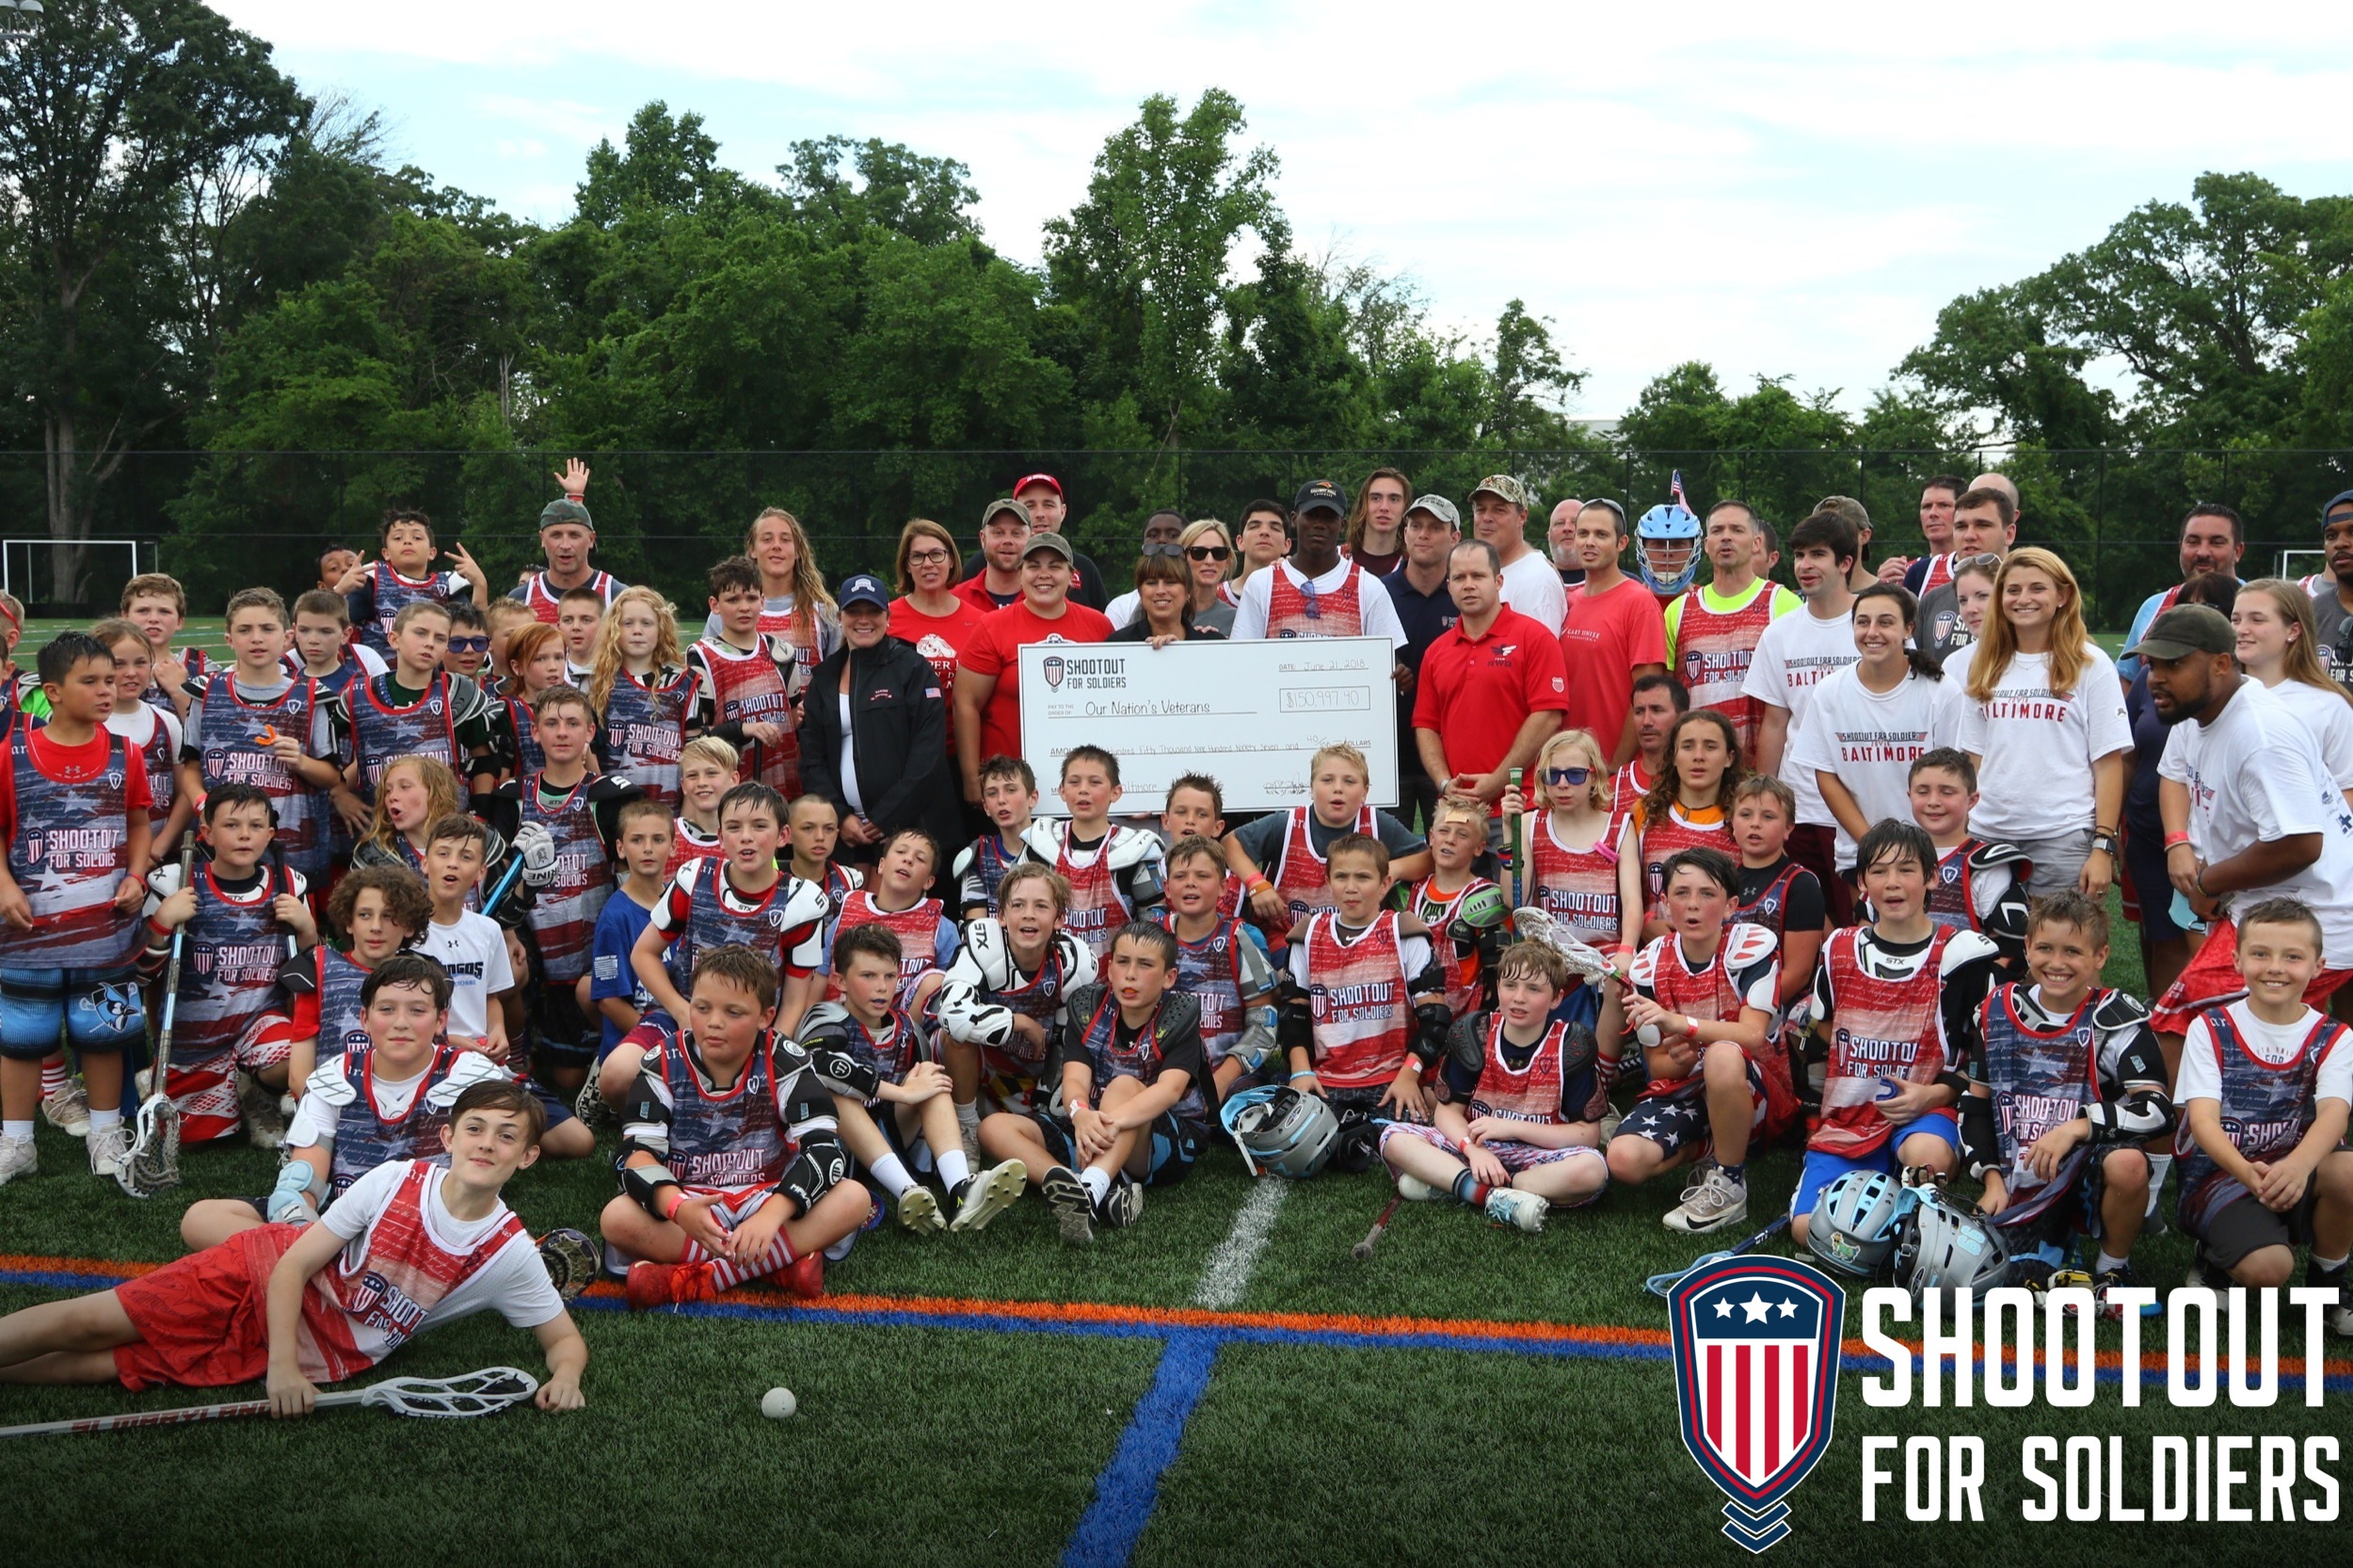 Shootout for Soldiers Baltimore Raises Over $150,000 for Wounded American Veterans in Seventh Year